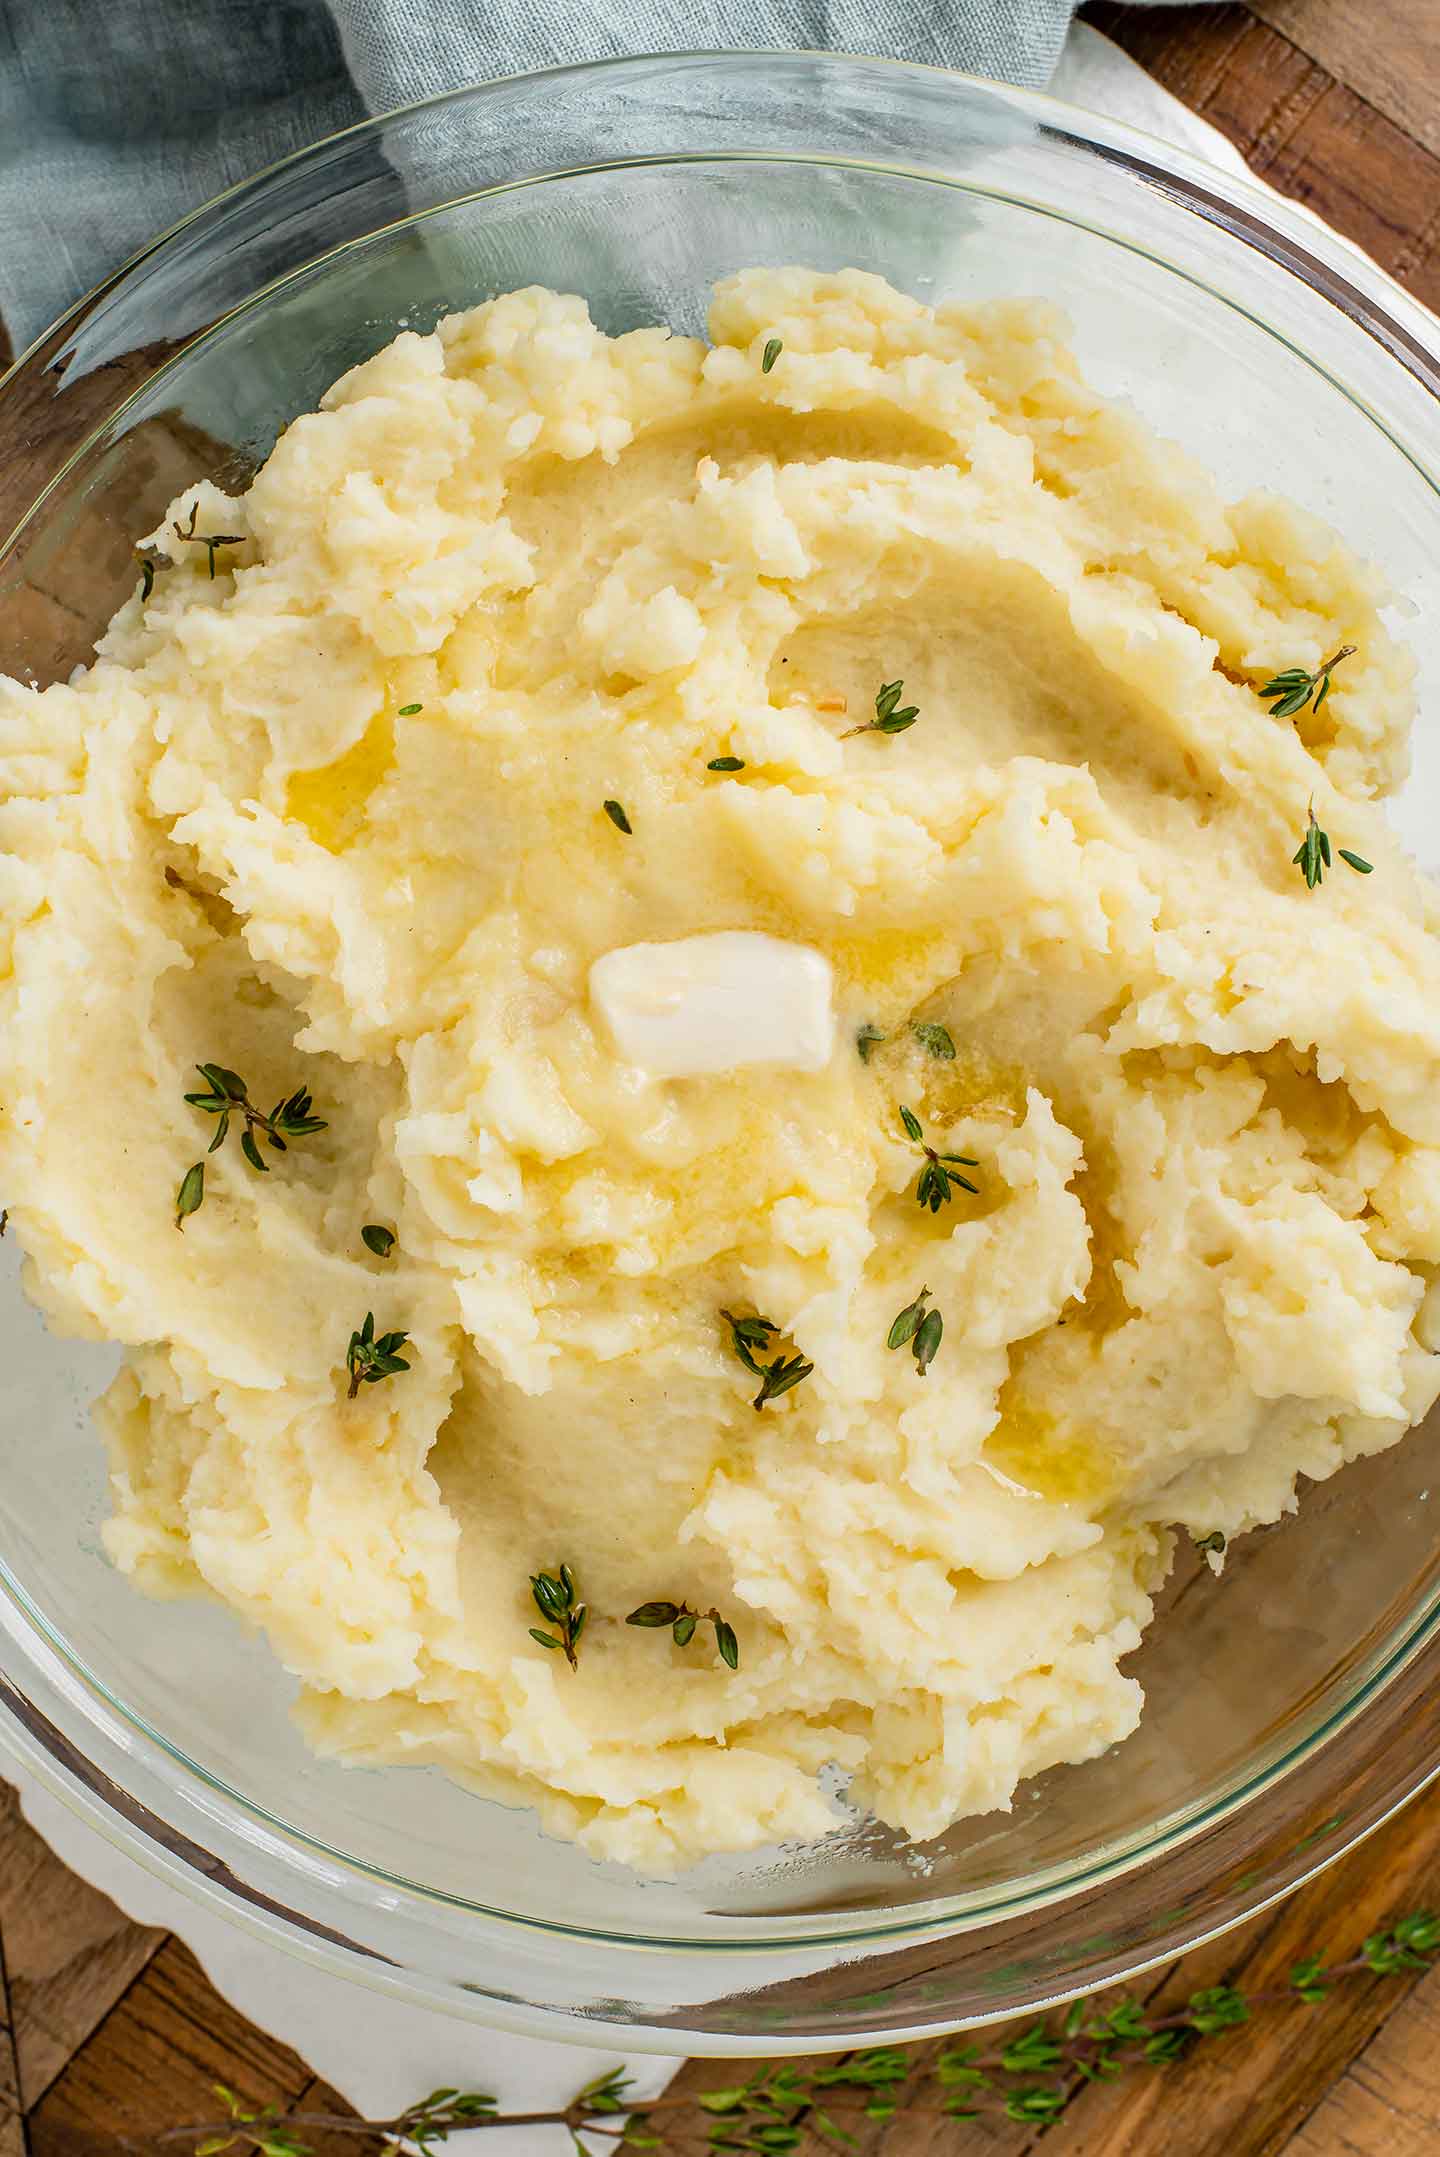 Top down view of fluffy mashed potatoes in a glass bowl. Fresh thyme is sprinkled on the potatoes and a slice of vegan butter melts on the top.